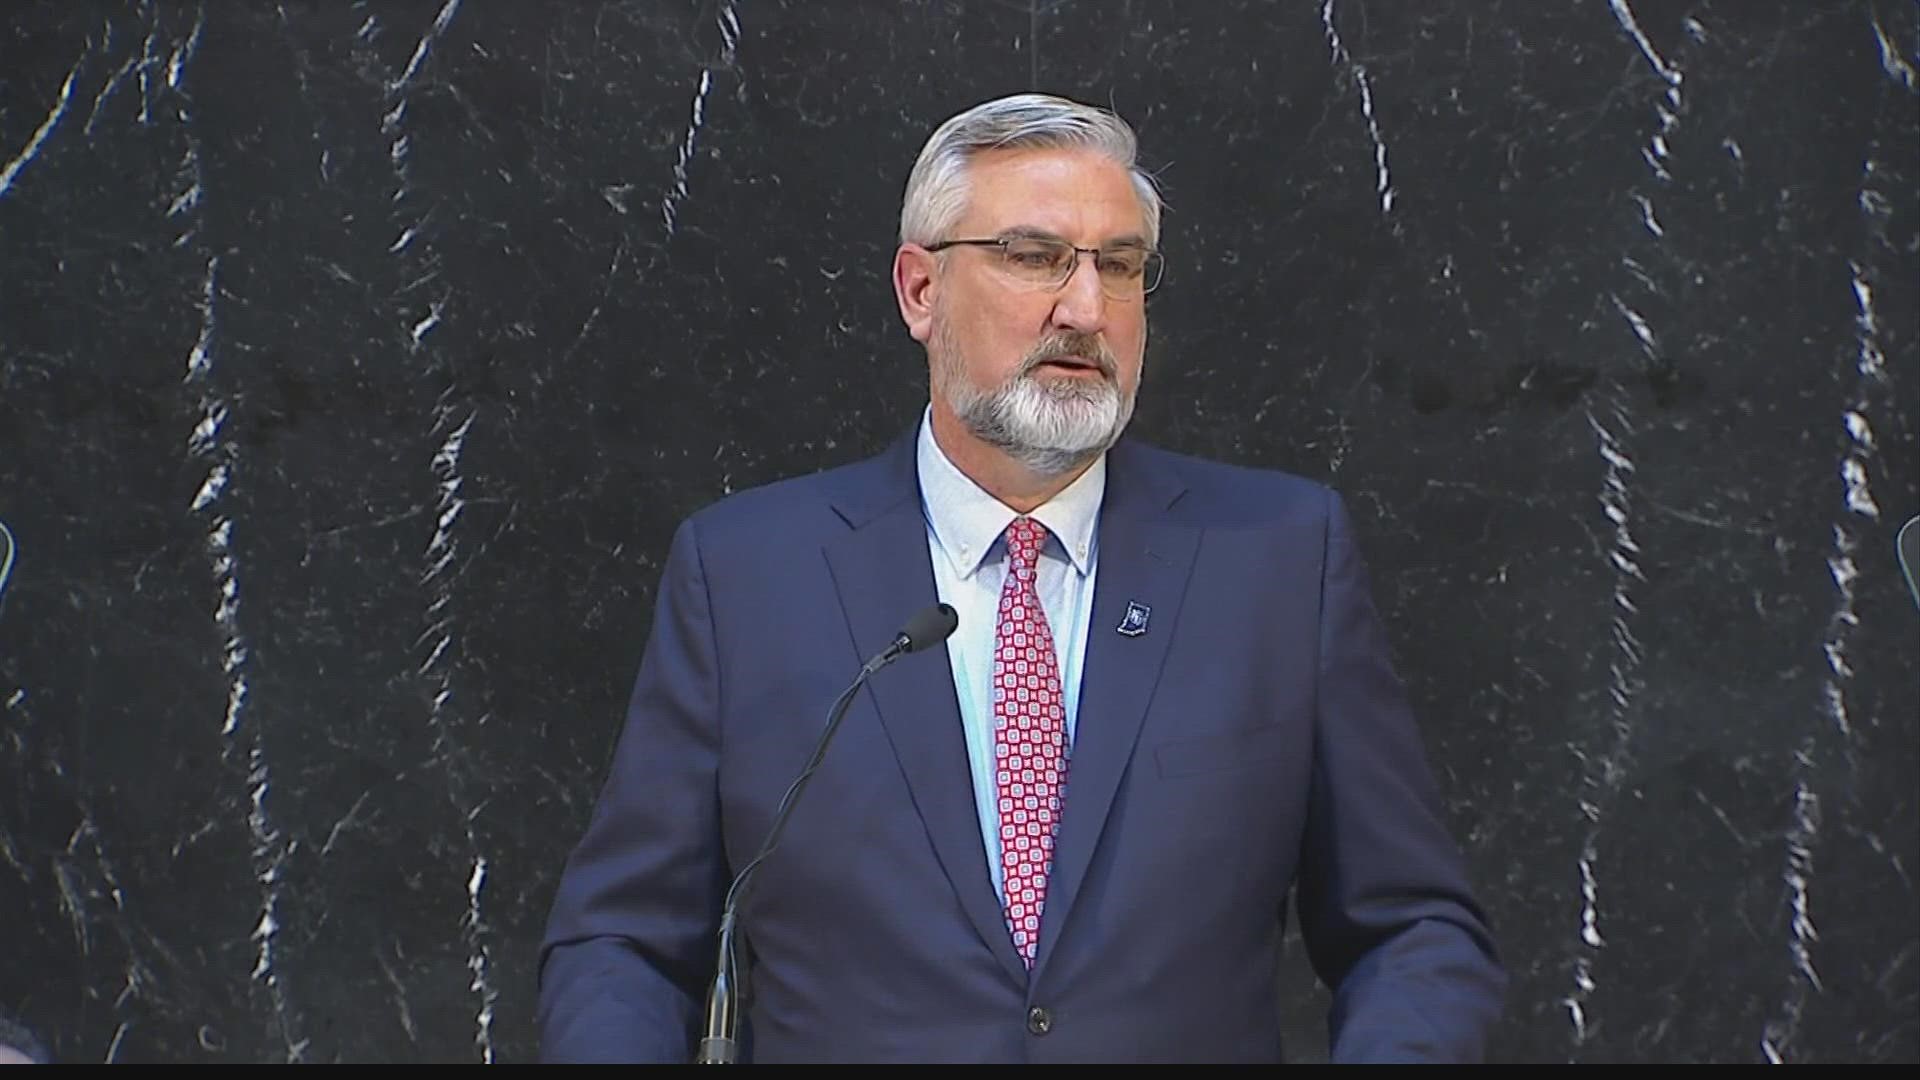 Gov. Eric Holcomb touched on education, the economy and the COVID pandemic during Tuesday's State of the State address.